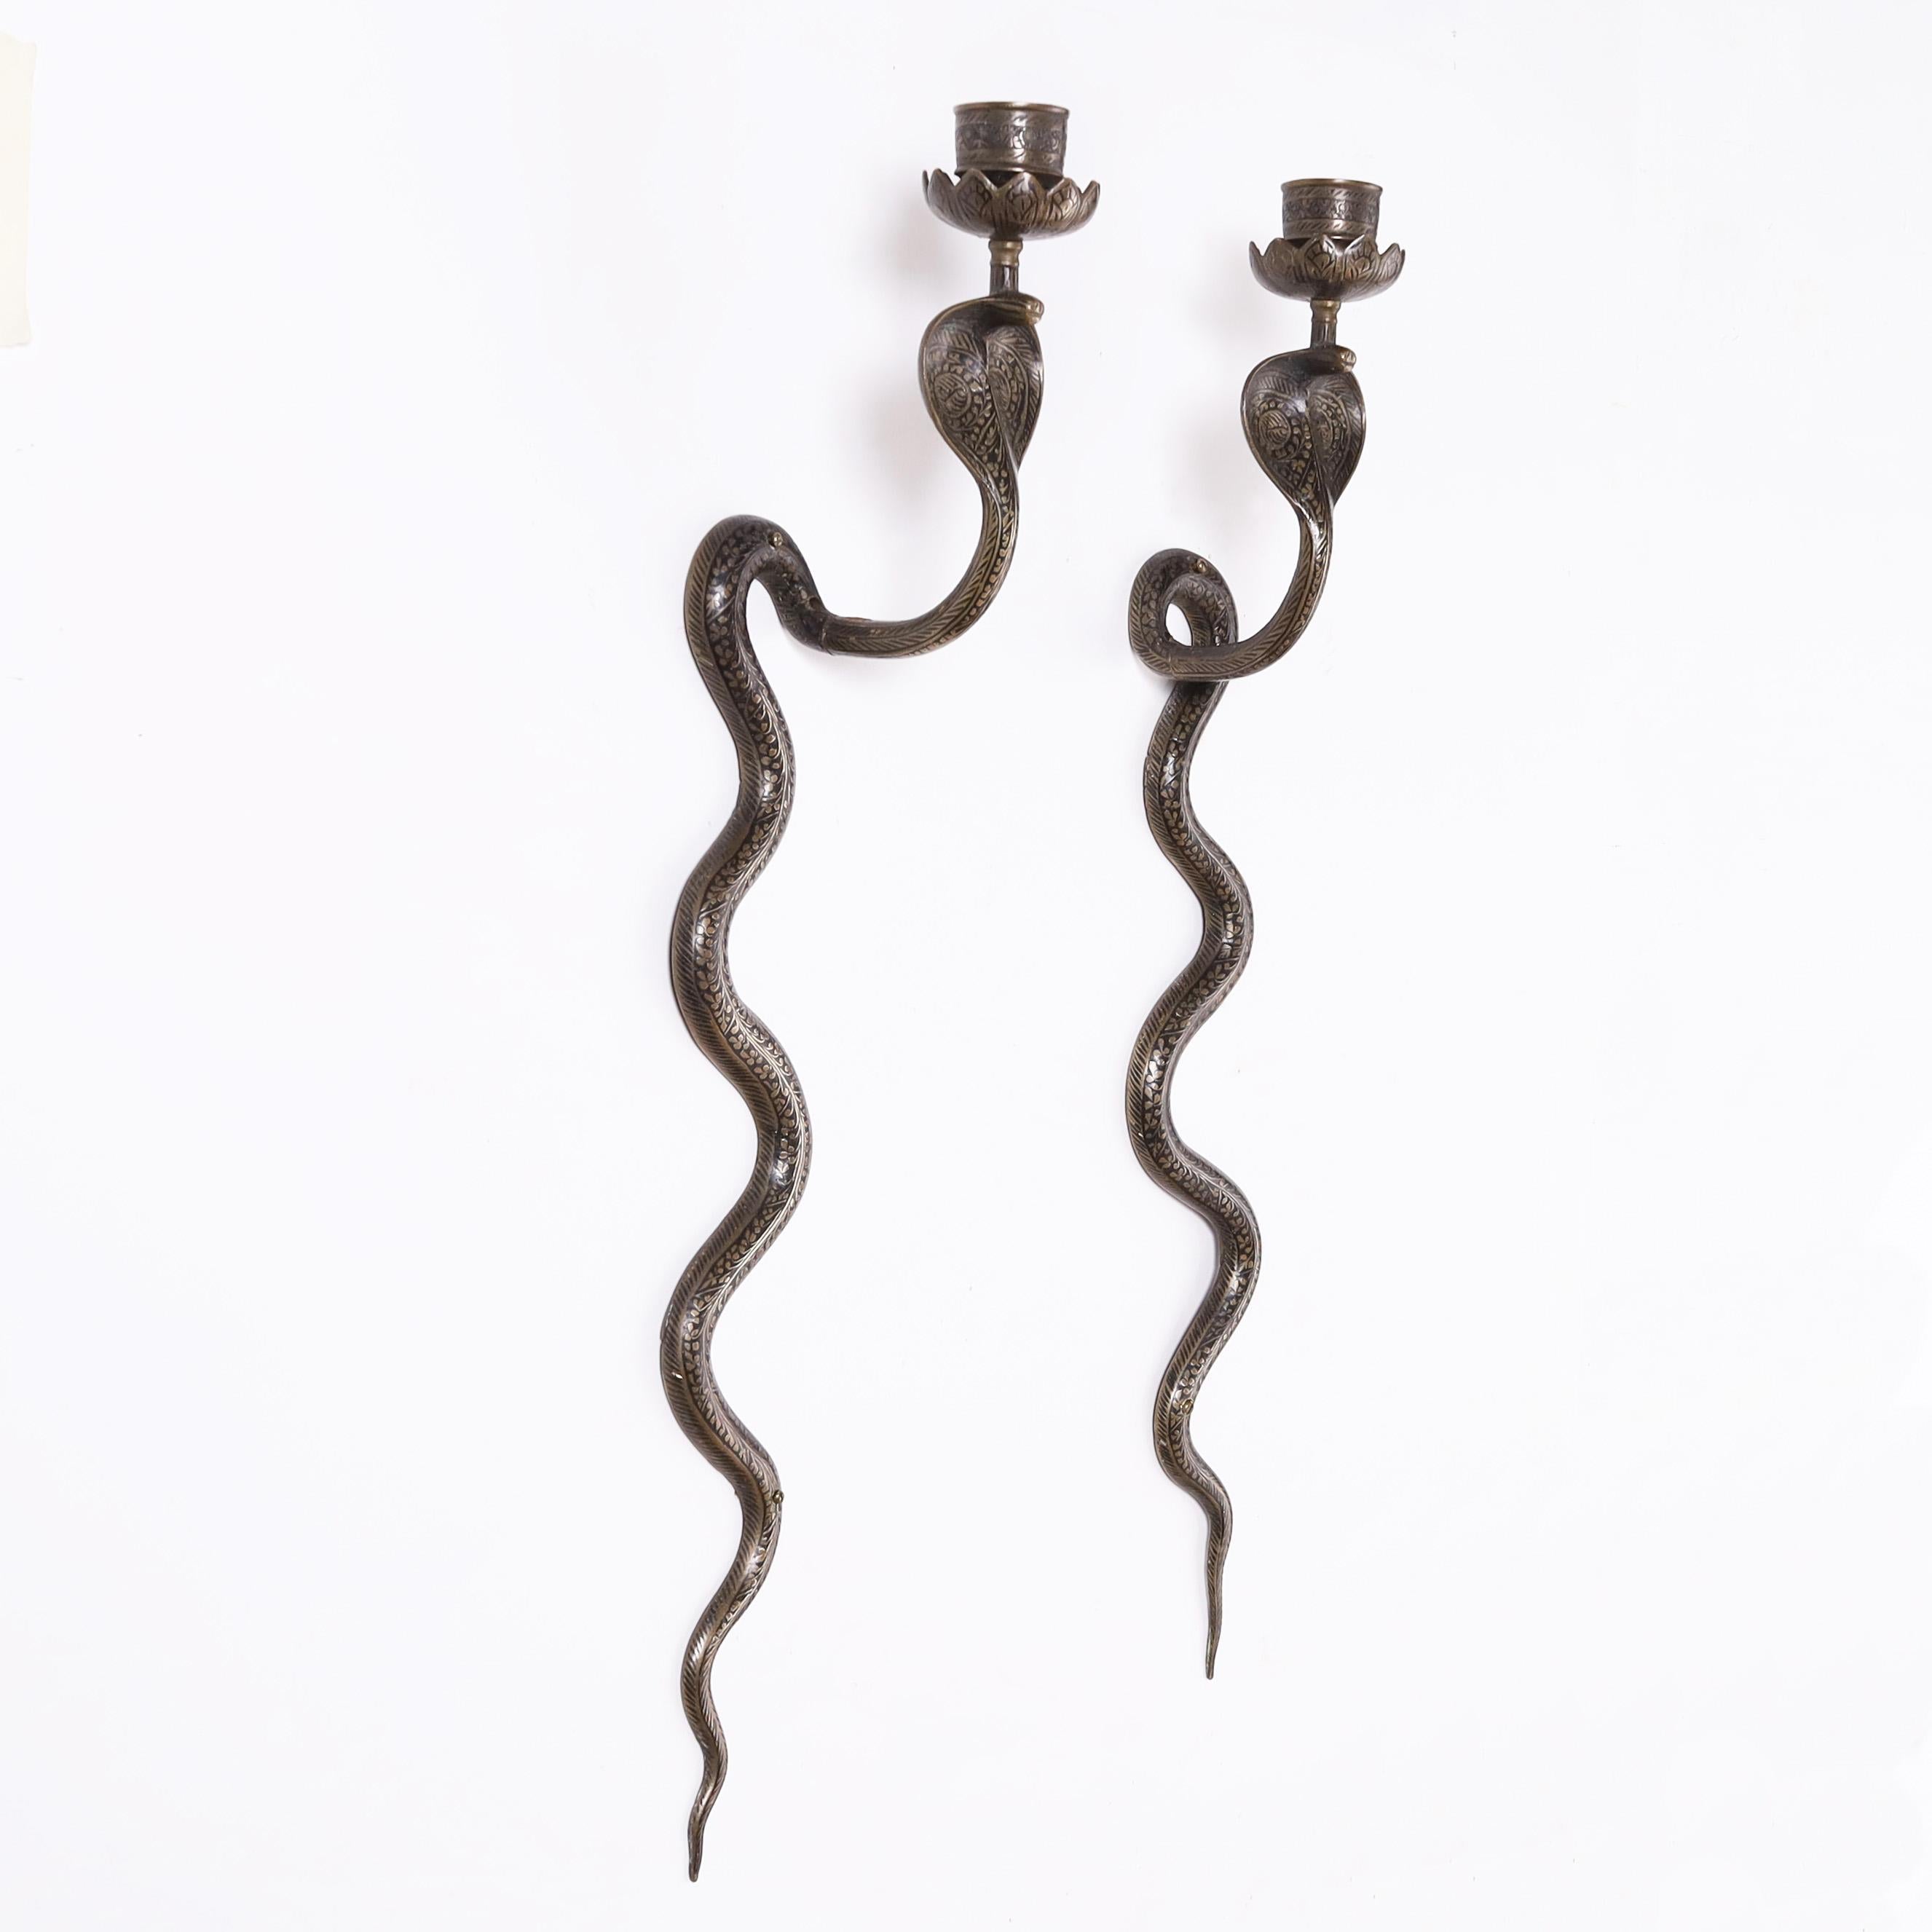 Standout pair of vintage Anglo Indian cobra or snake wall sconces crafted in brass with etched floral and geometric designs highlighted in black enamel and having an overall bronze like patina. 